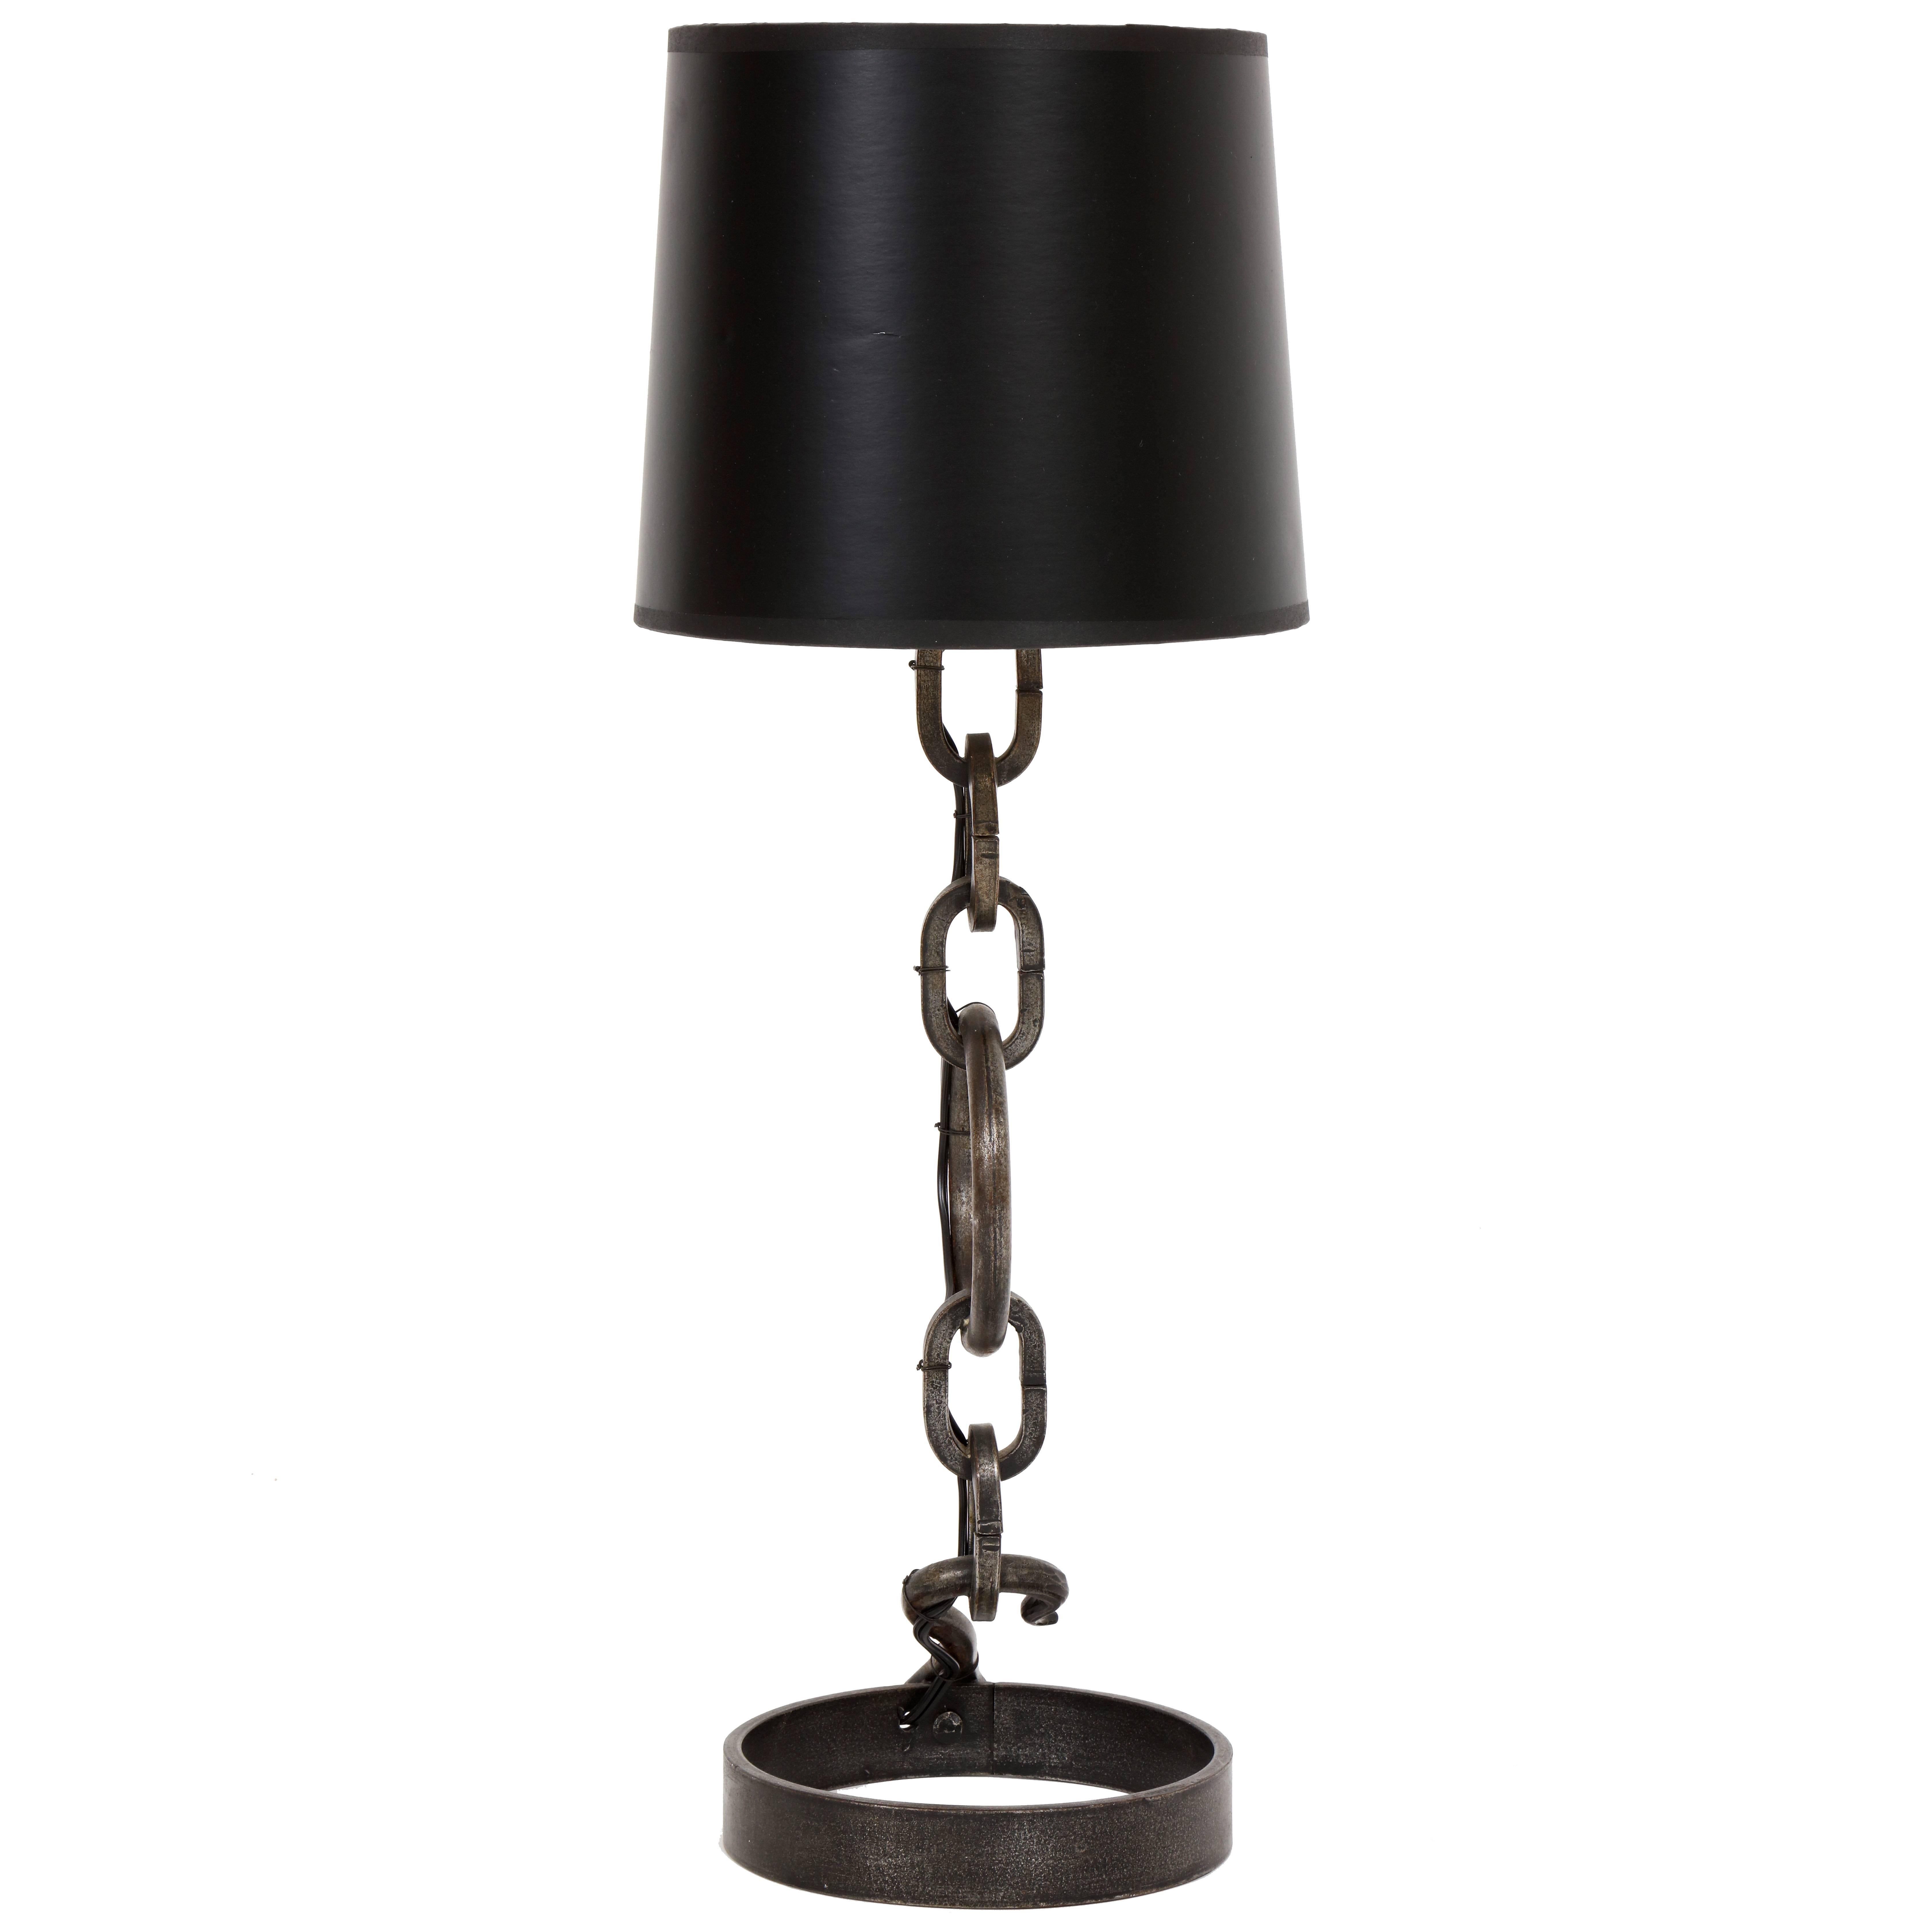 French chain link table lamp after Franz West from France.

2.5 inches Deep
22 inches Height
6 inches Wide
 